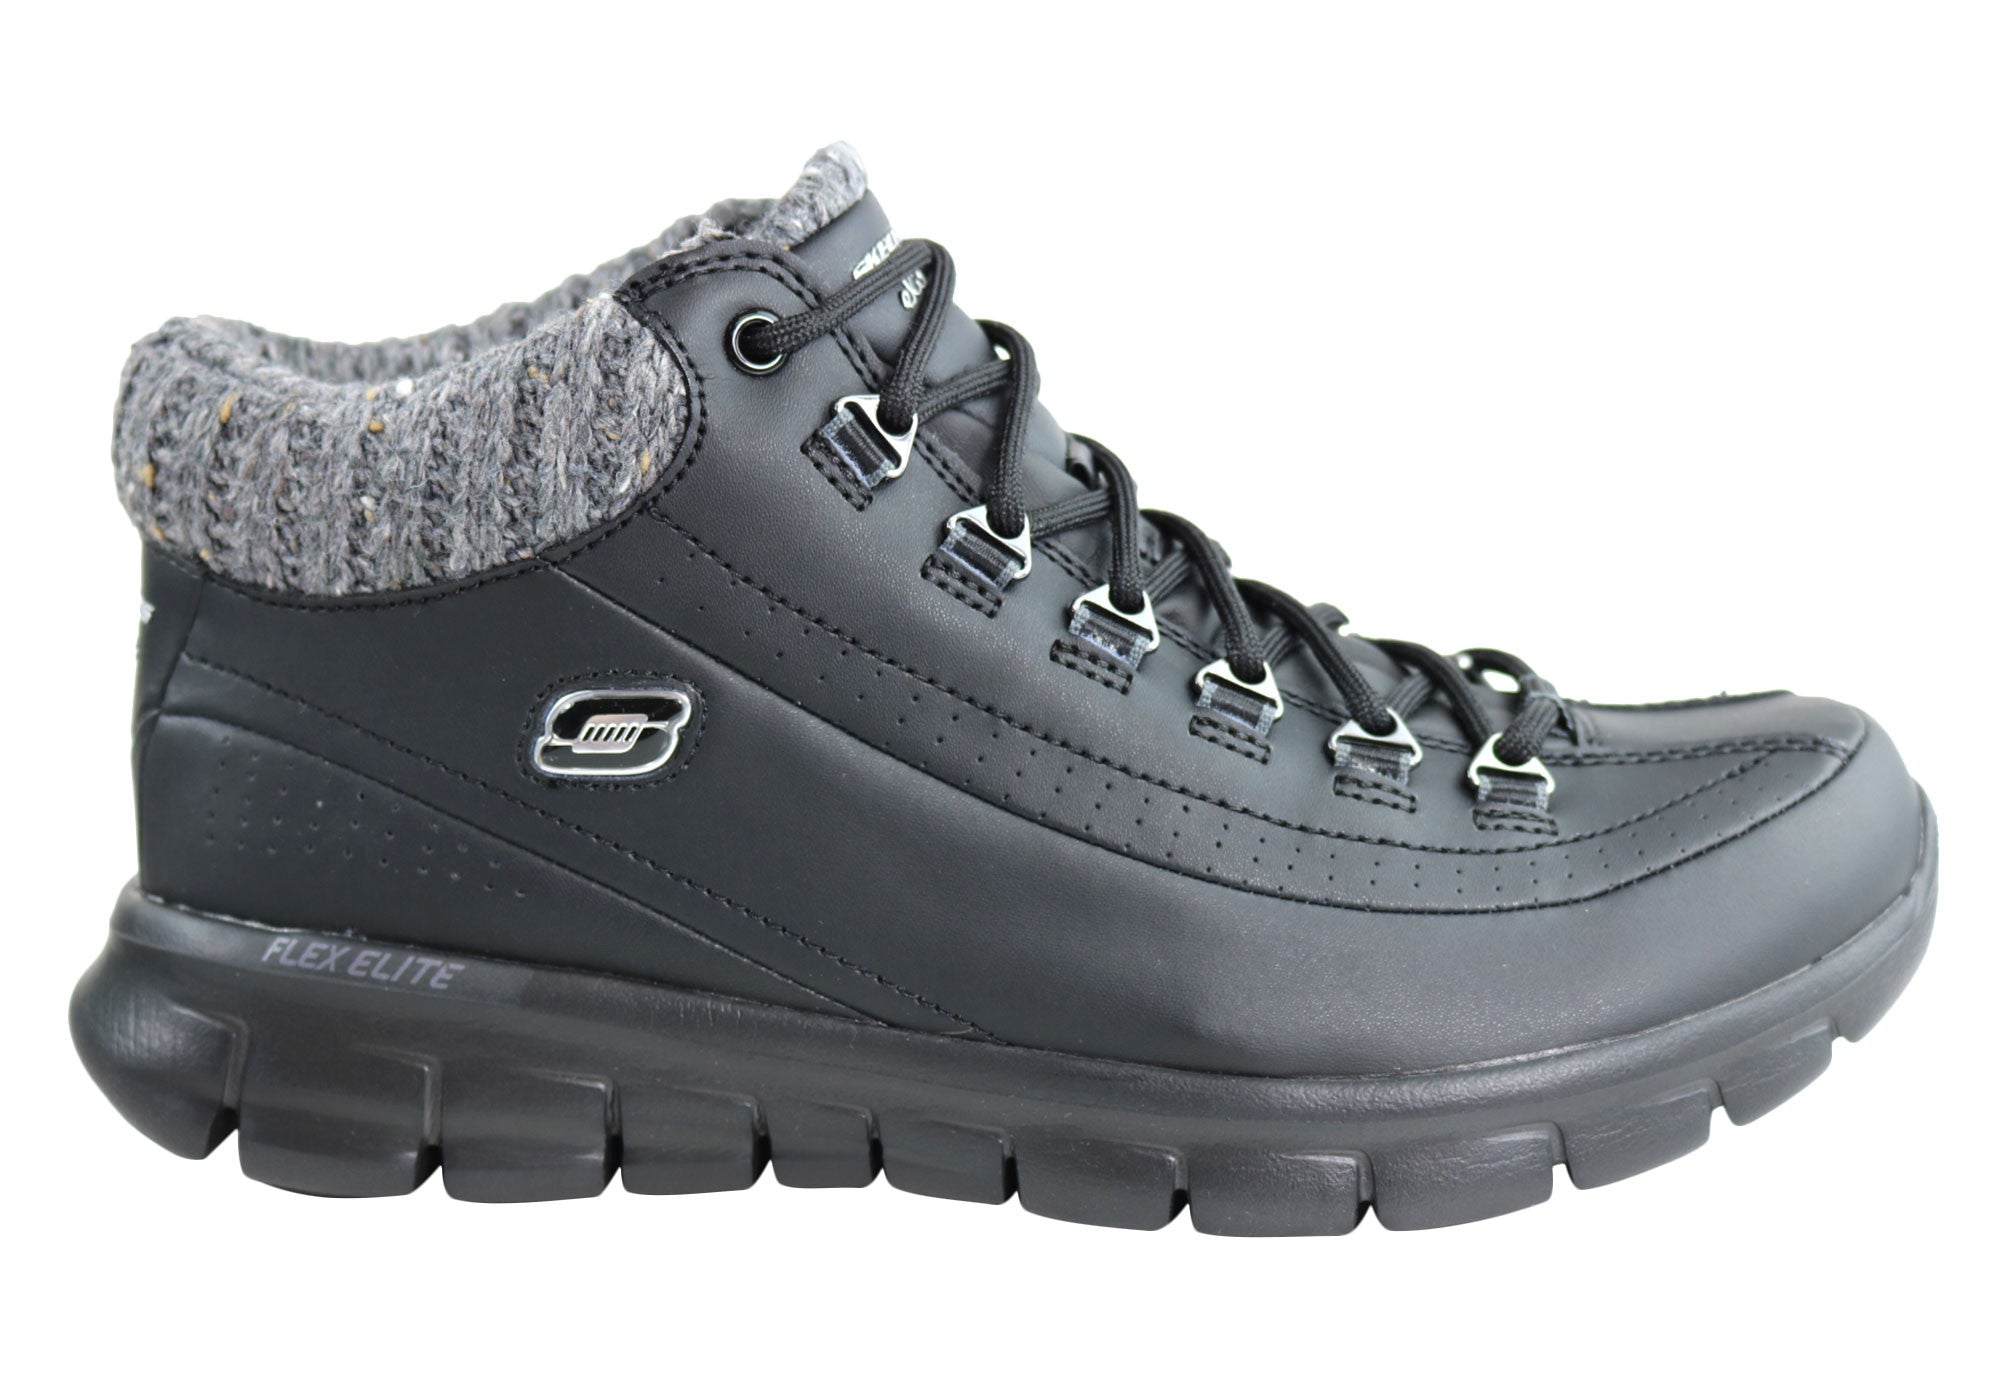 skechers north boots